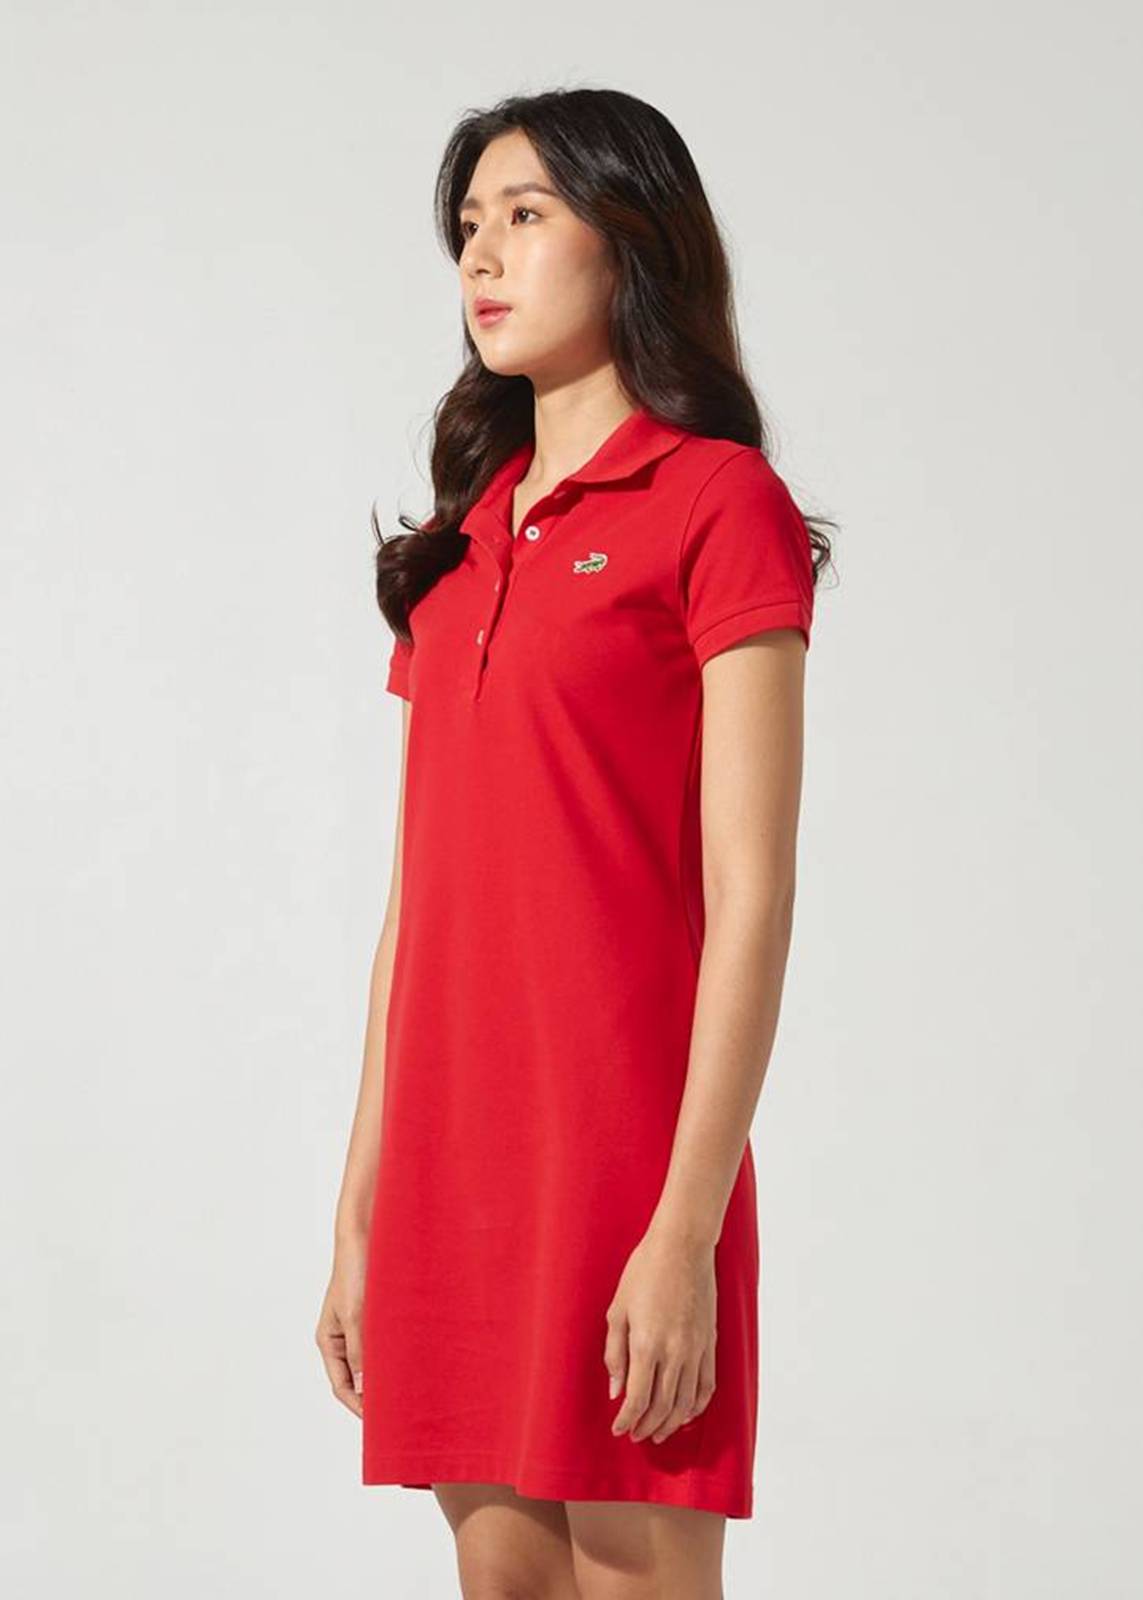 MOLTEN LAVA RED ATHLETIC LENGTH DRESS